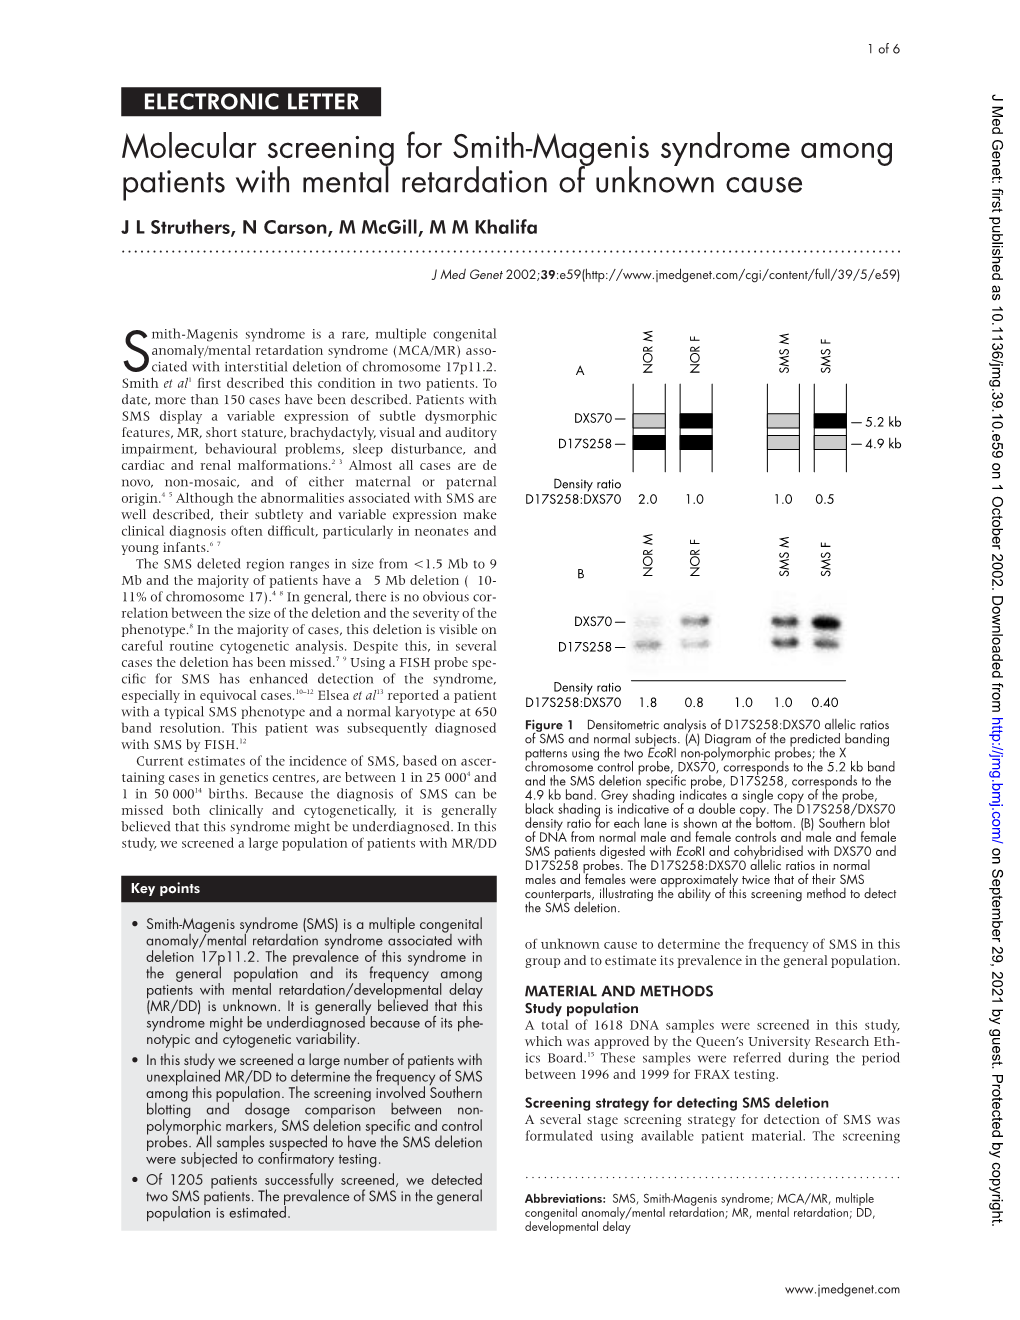 Molecular Screening for Smith-Magenis Syndrome Among Patients with Mental Retardation of Unknown Cause J L Struthers, N Carson, M Mcgill, M M Khalifa